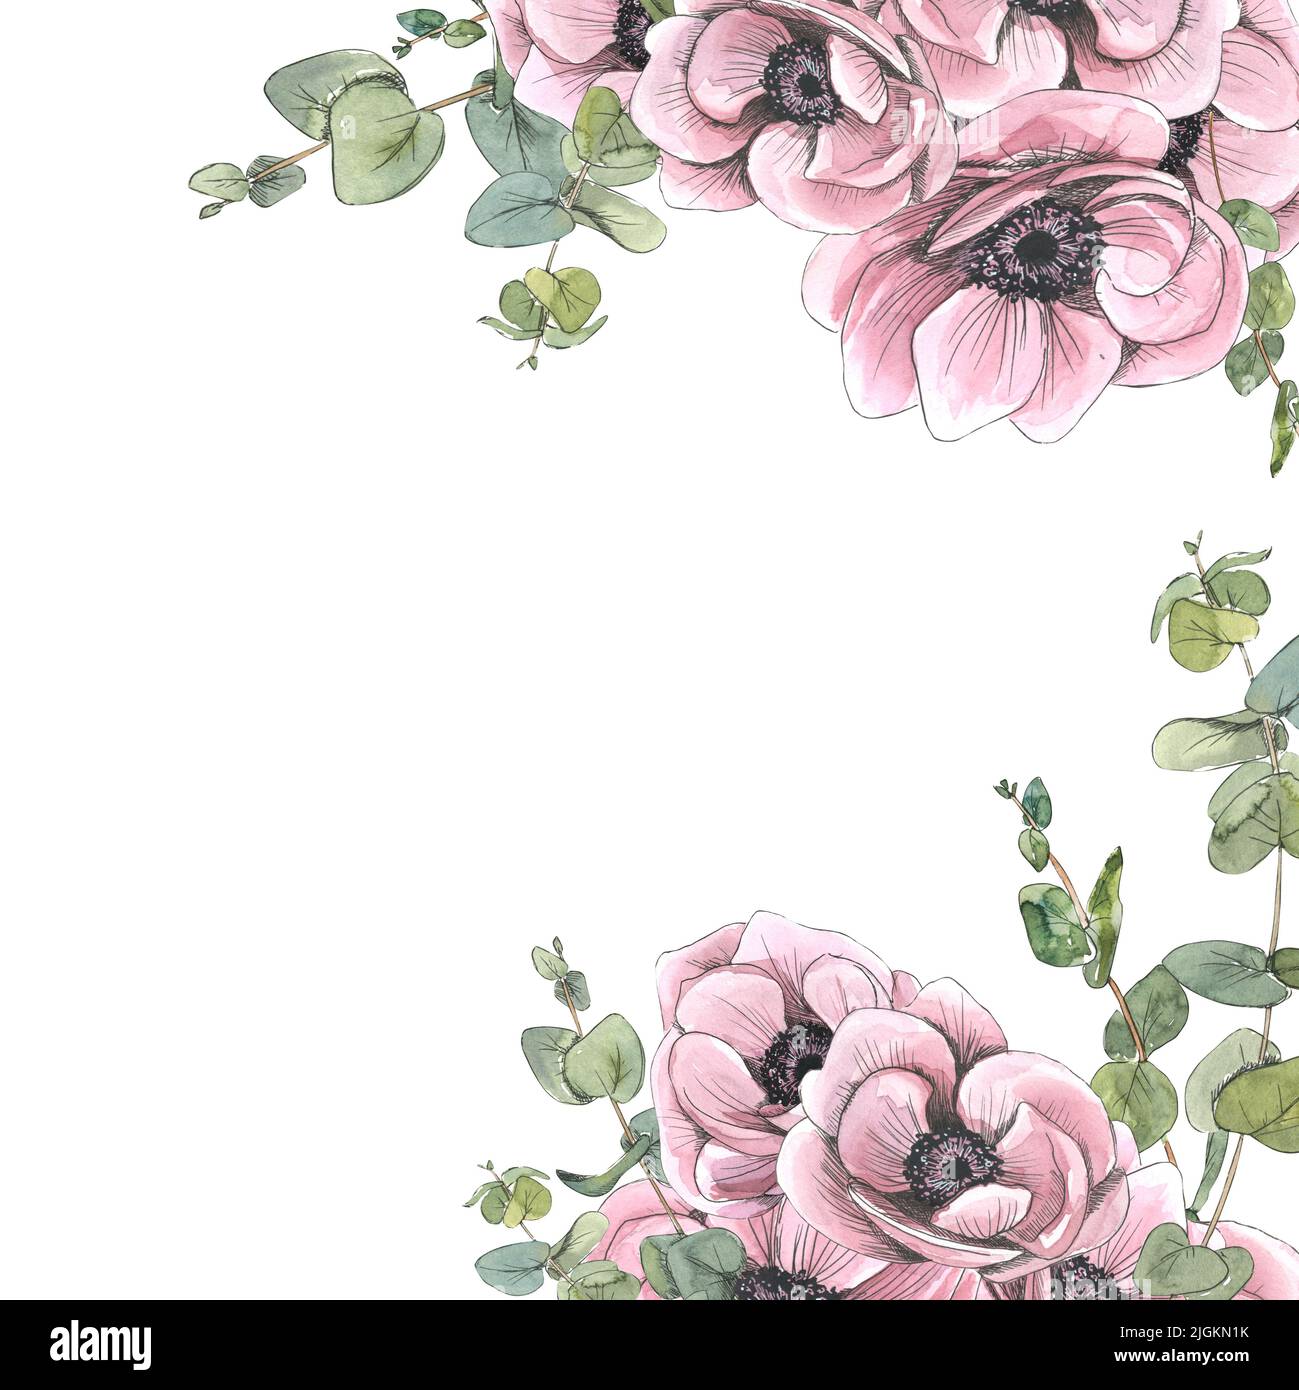 A frame of pink anemone flowers and eucalyptus twigs. Watercolor illustration in sketch style with graphic elements. From a large set of PARIS. For Stock Photo